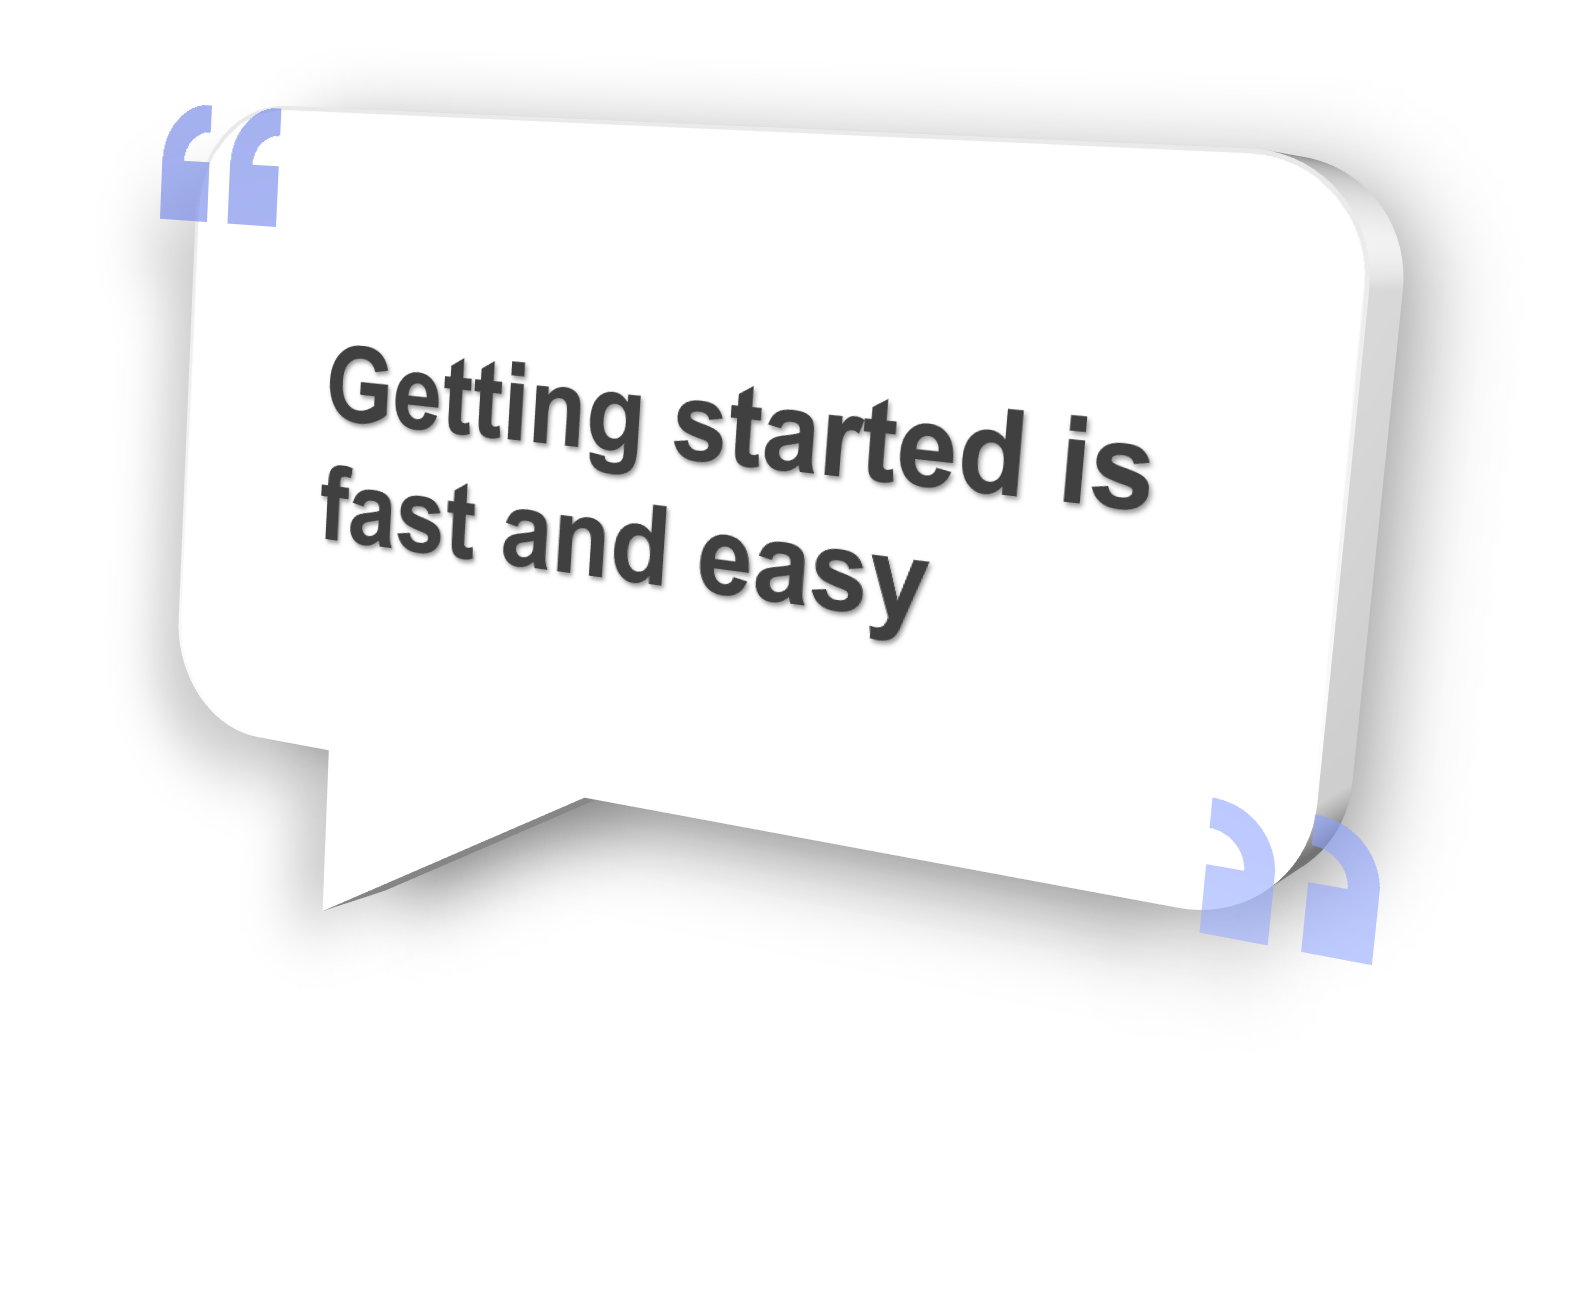 User testimonial 1 quotation bubble: 'Getting started is fast and easy'